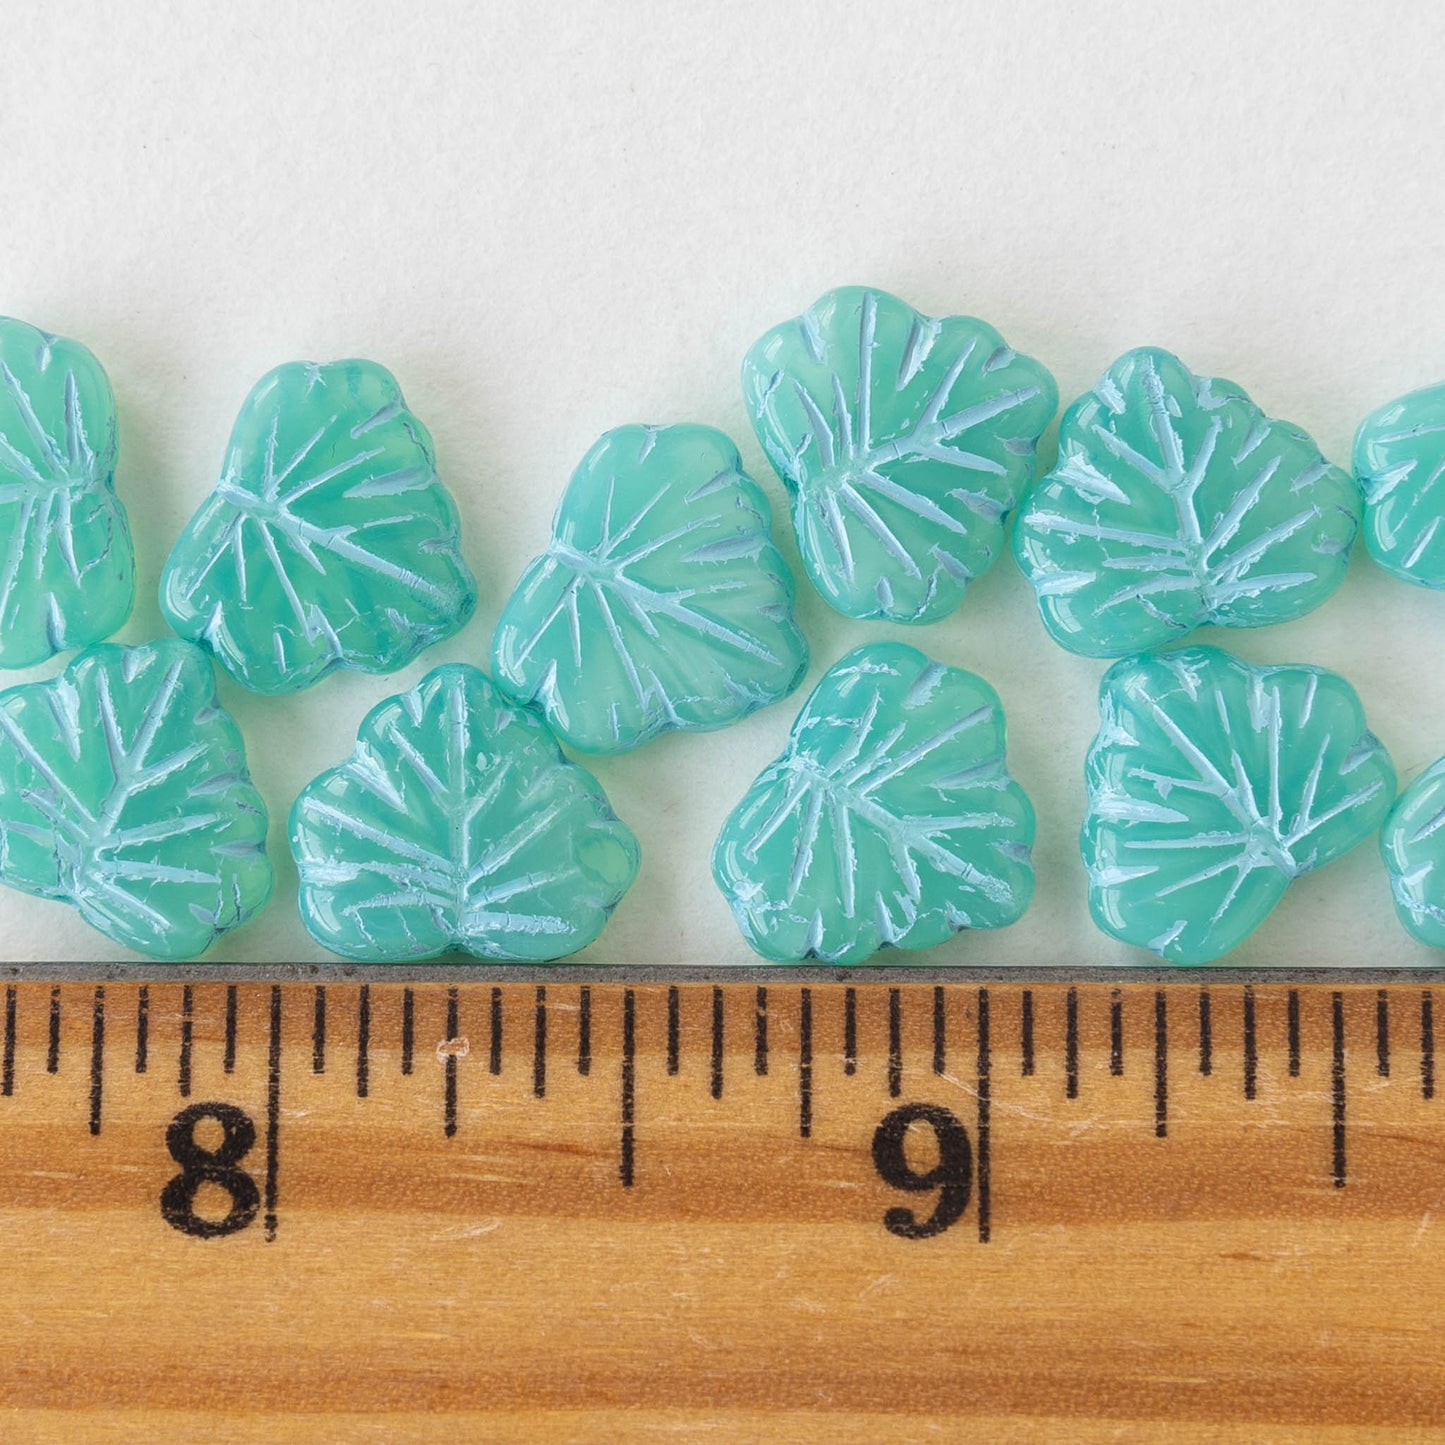 Load image into Gallery viewer, Maple Leaf Beads - Seafoam with Blue Wash - 15
